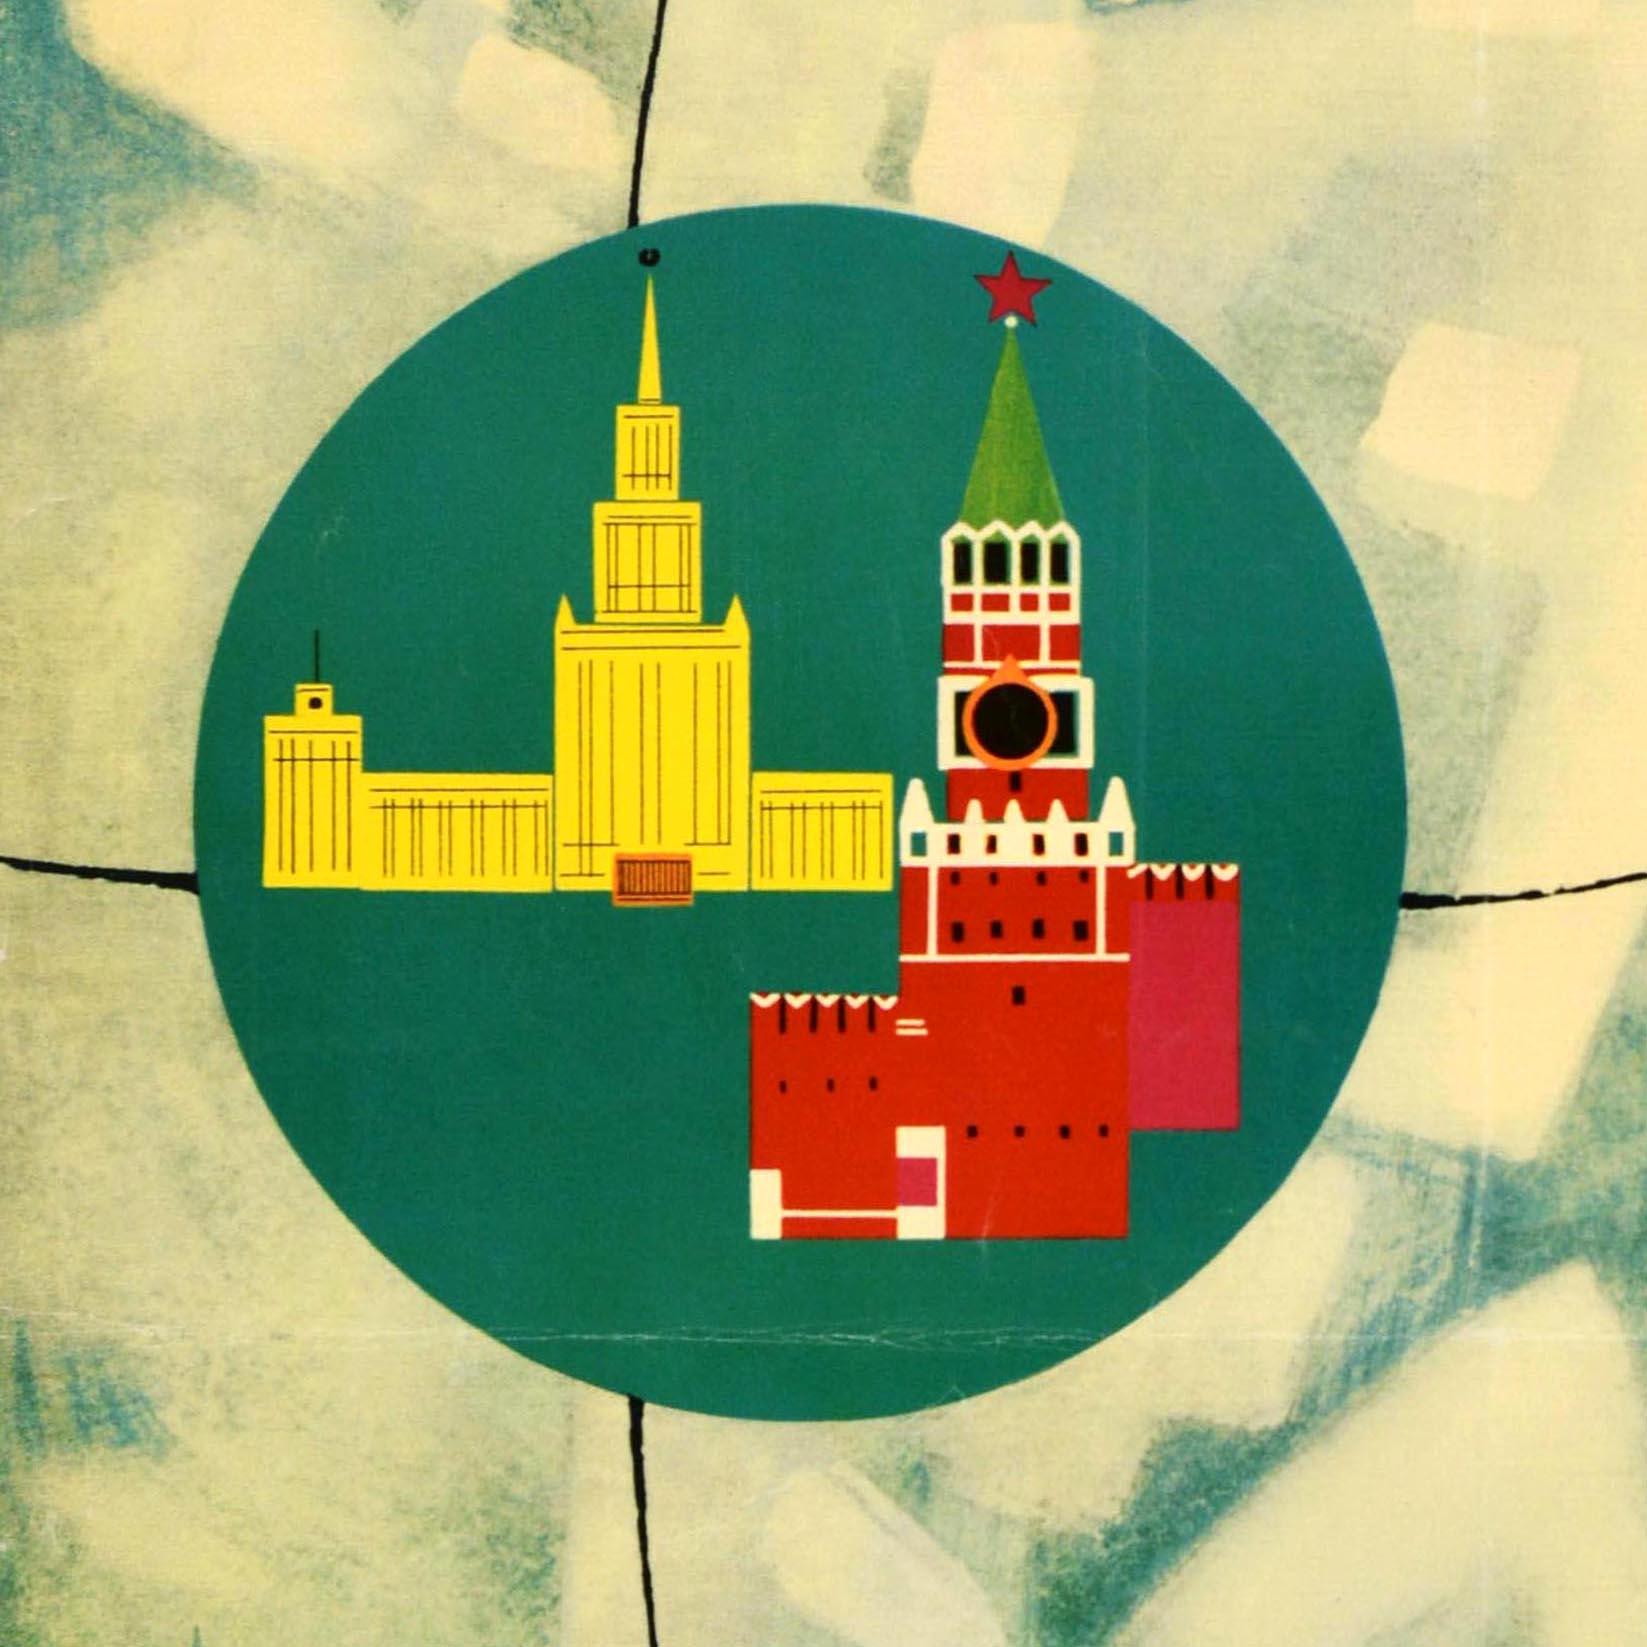 Original vintage travel poster promoting tourism in the Soviet Union featuring a great illustration of a cosmonaut / astronaut in a space suit with a red star above and an image of a skyscraper and the Moscow Kremlin inside a dark green circle, the